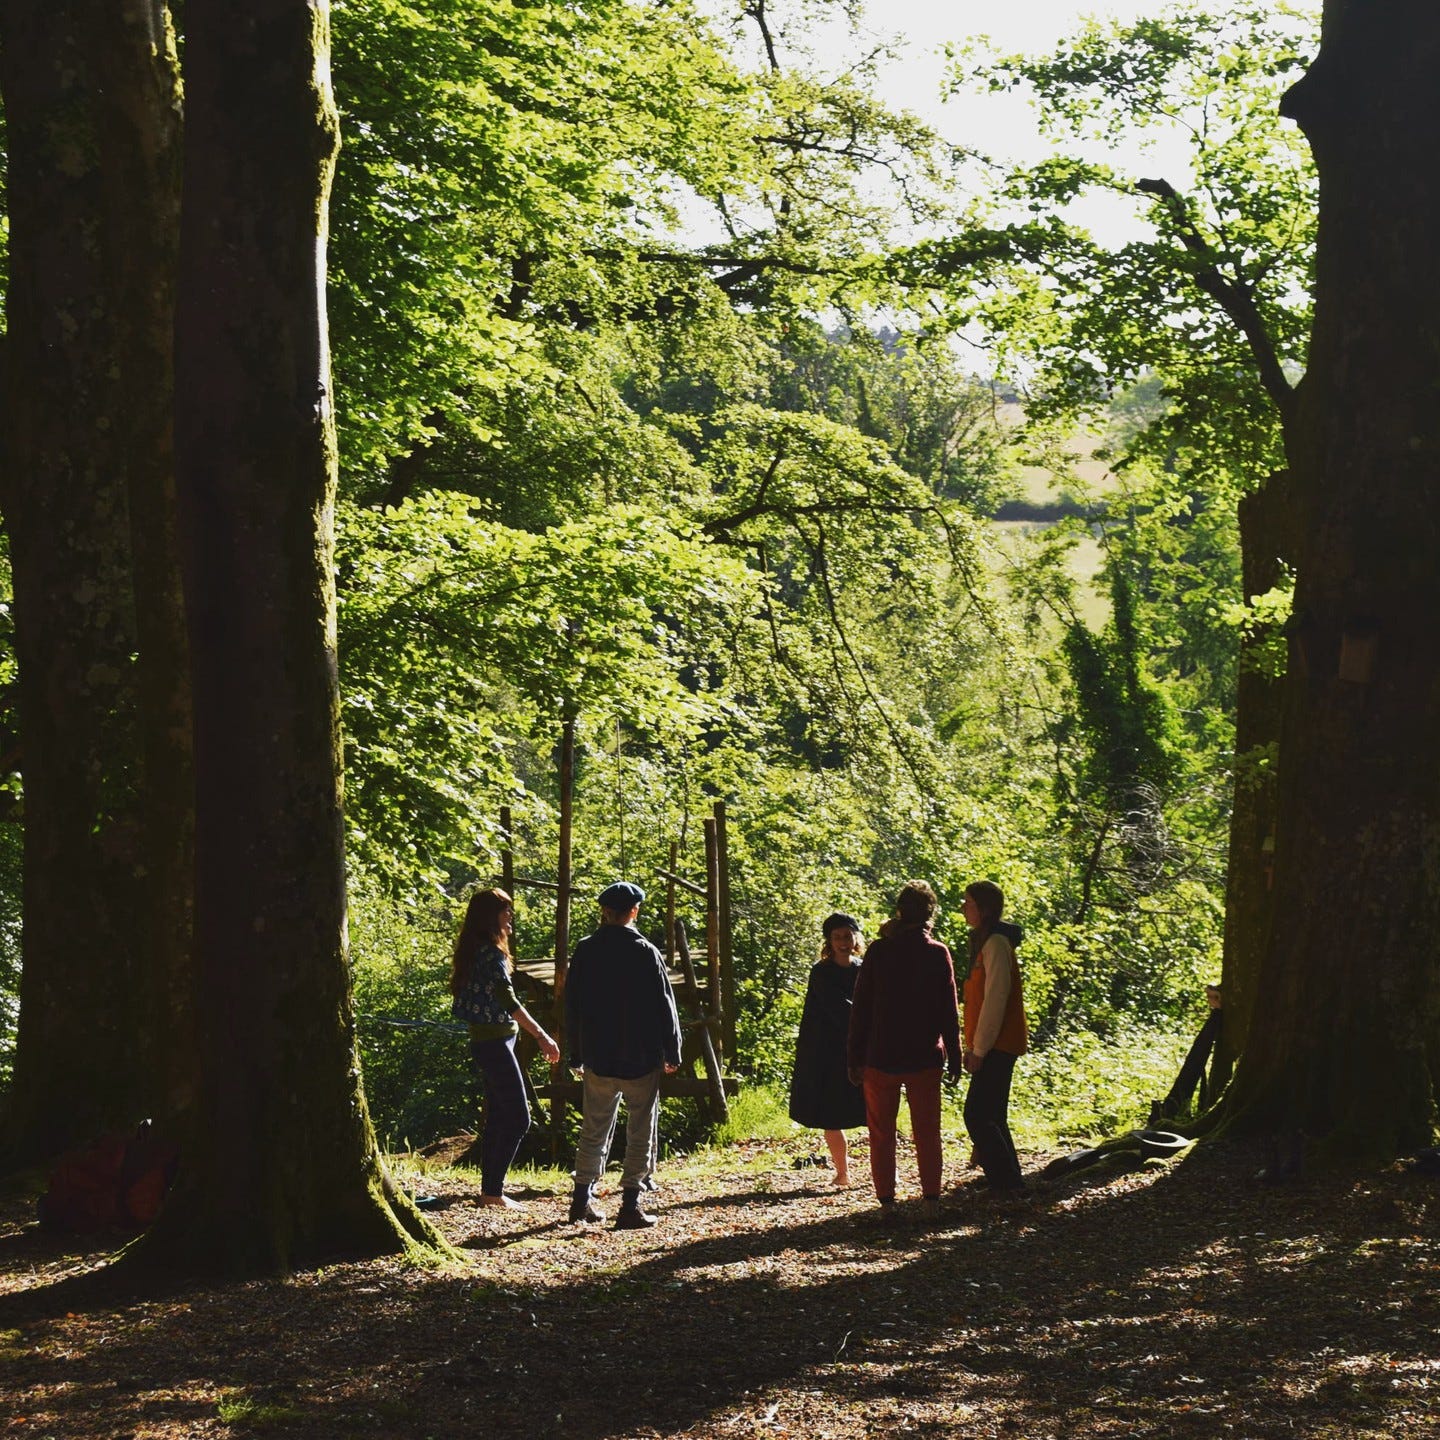 Small group of people singing beneath huge beech trees